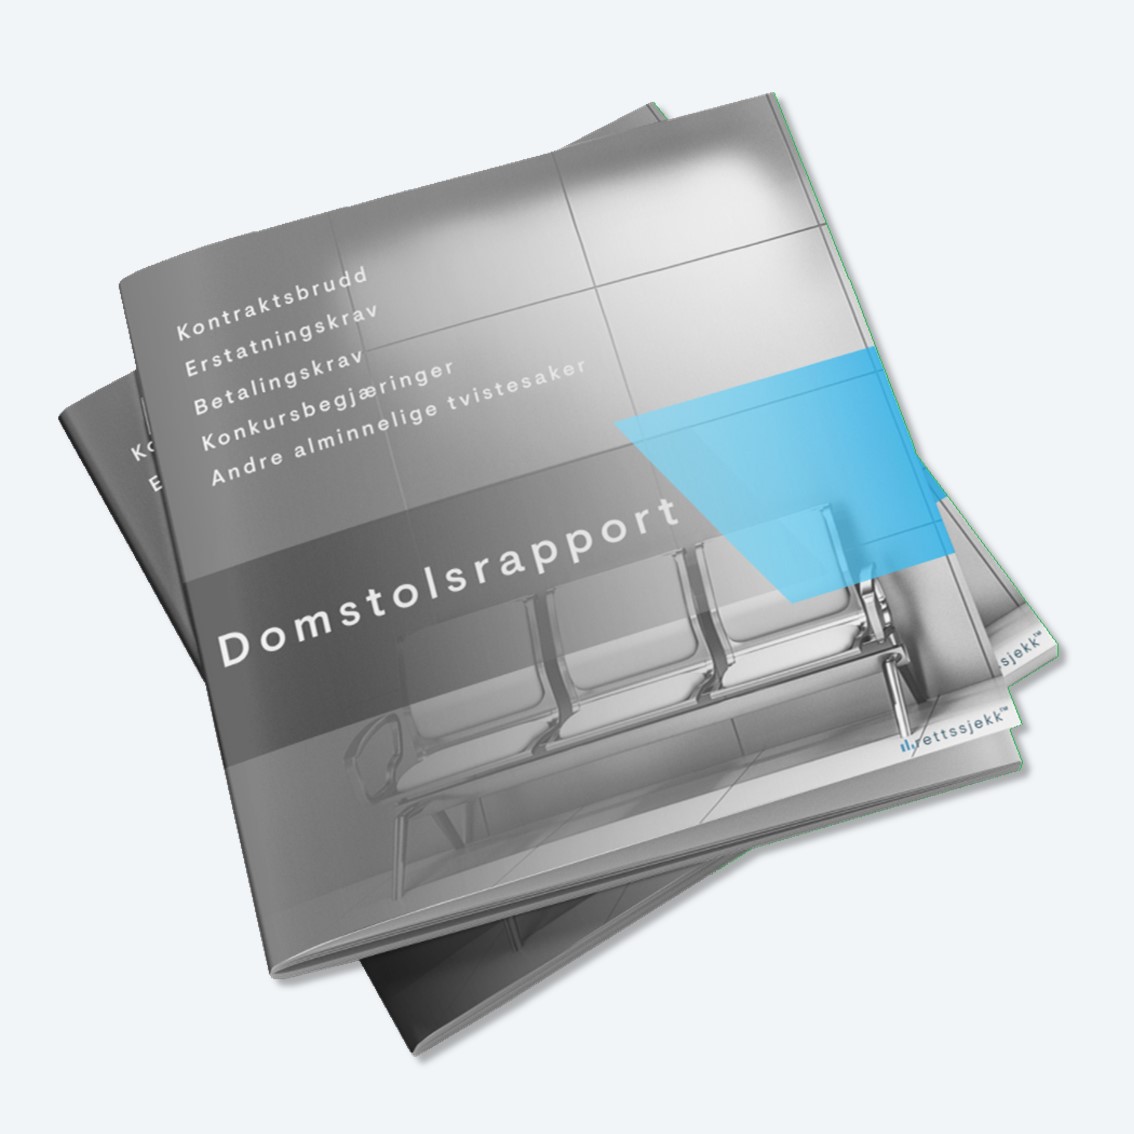 Domstolsrapport_grey